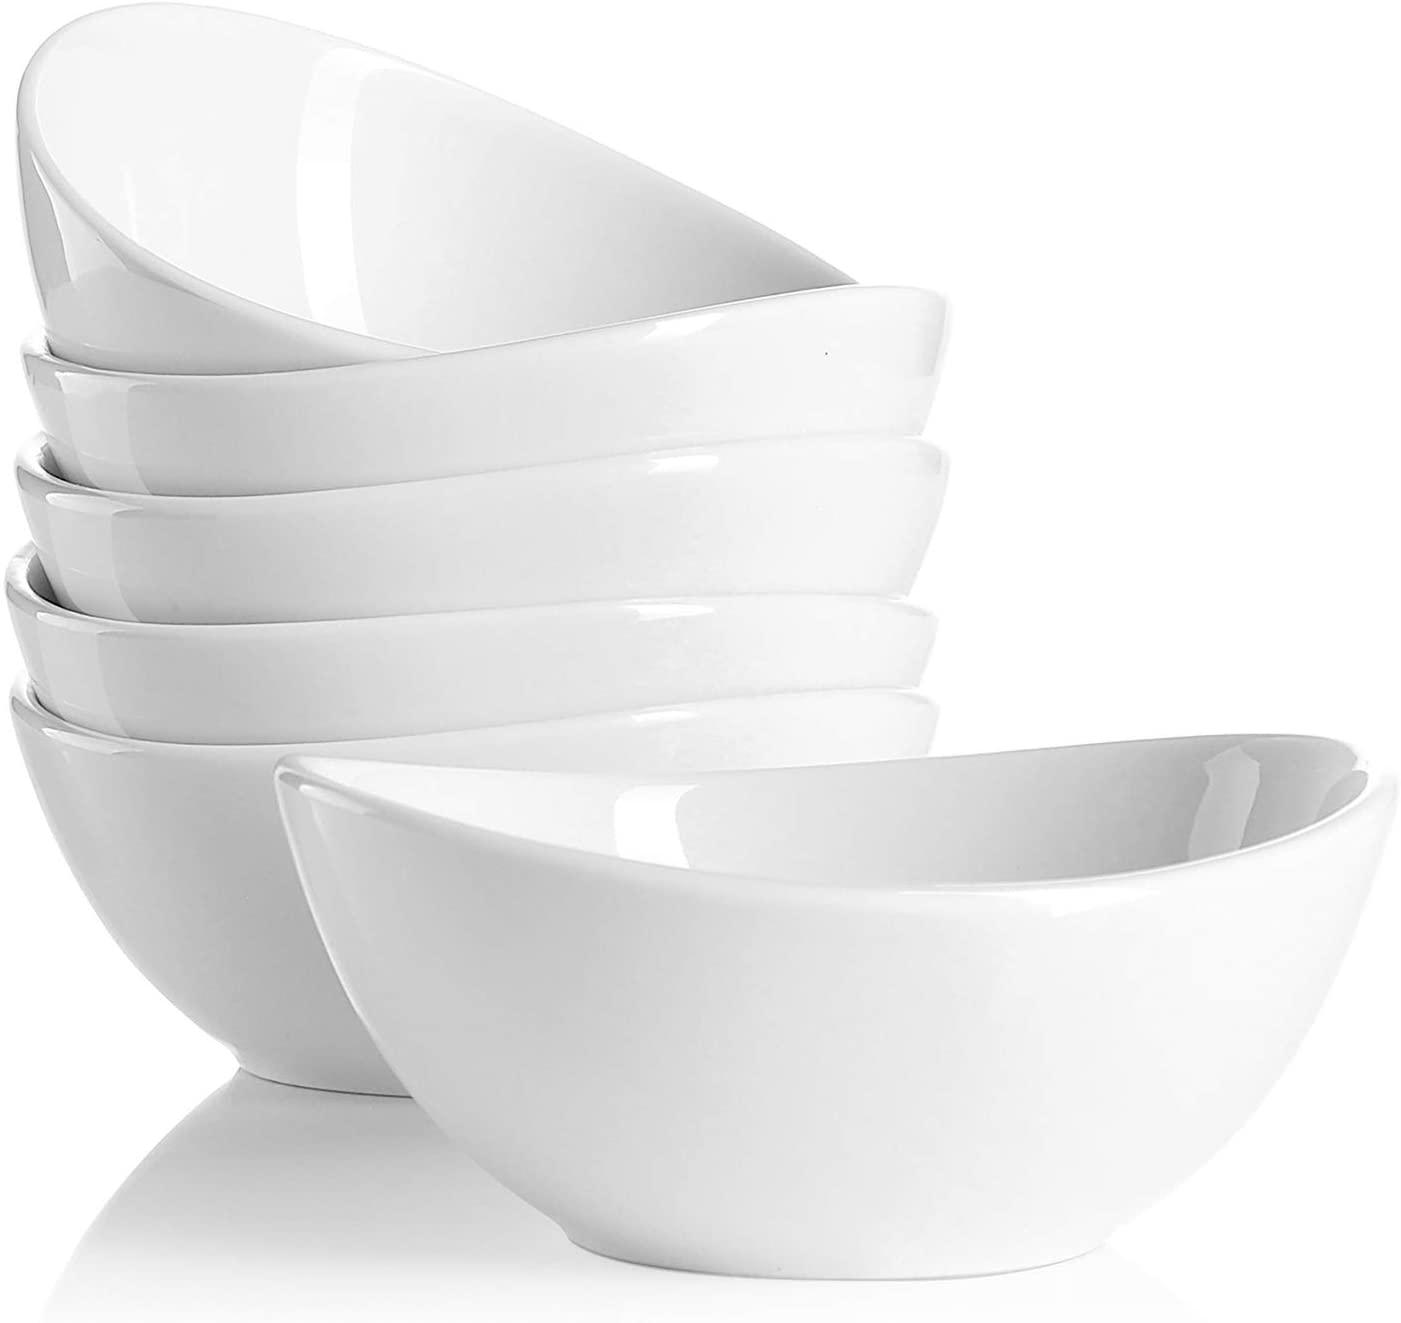 6 Sweese Porcelain Bowls for $14.89